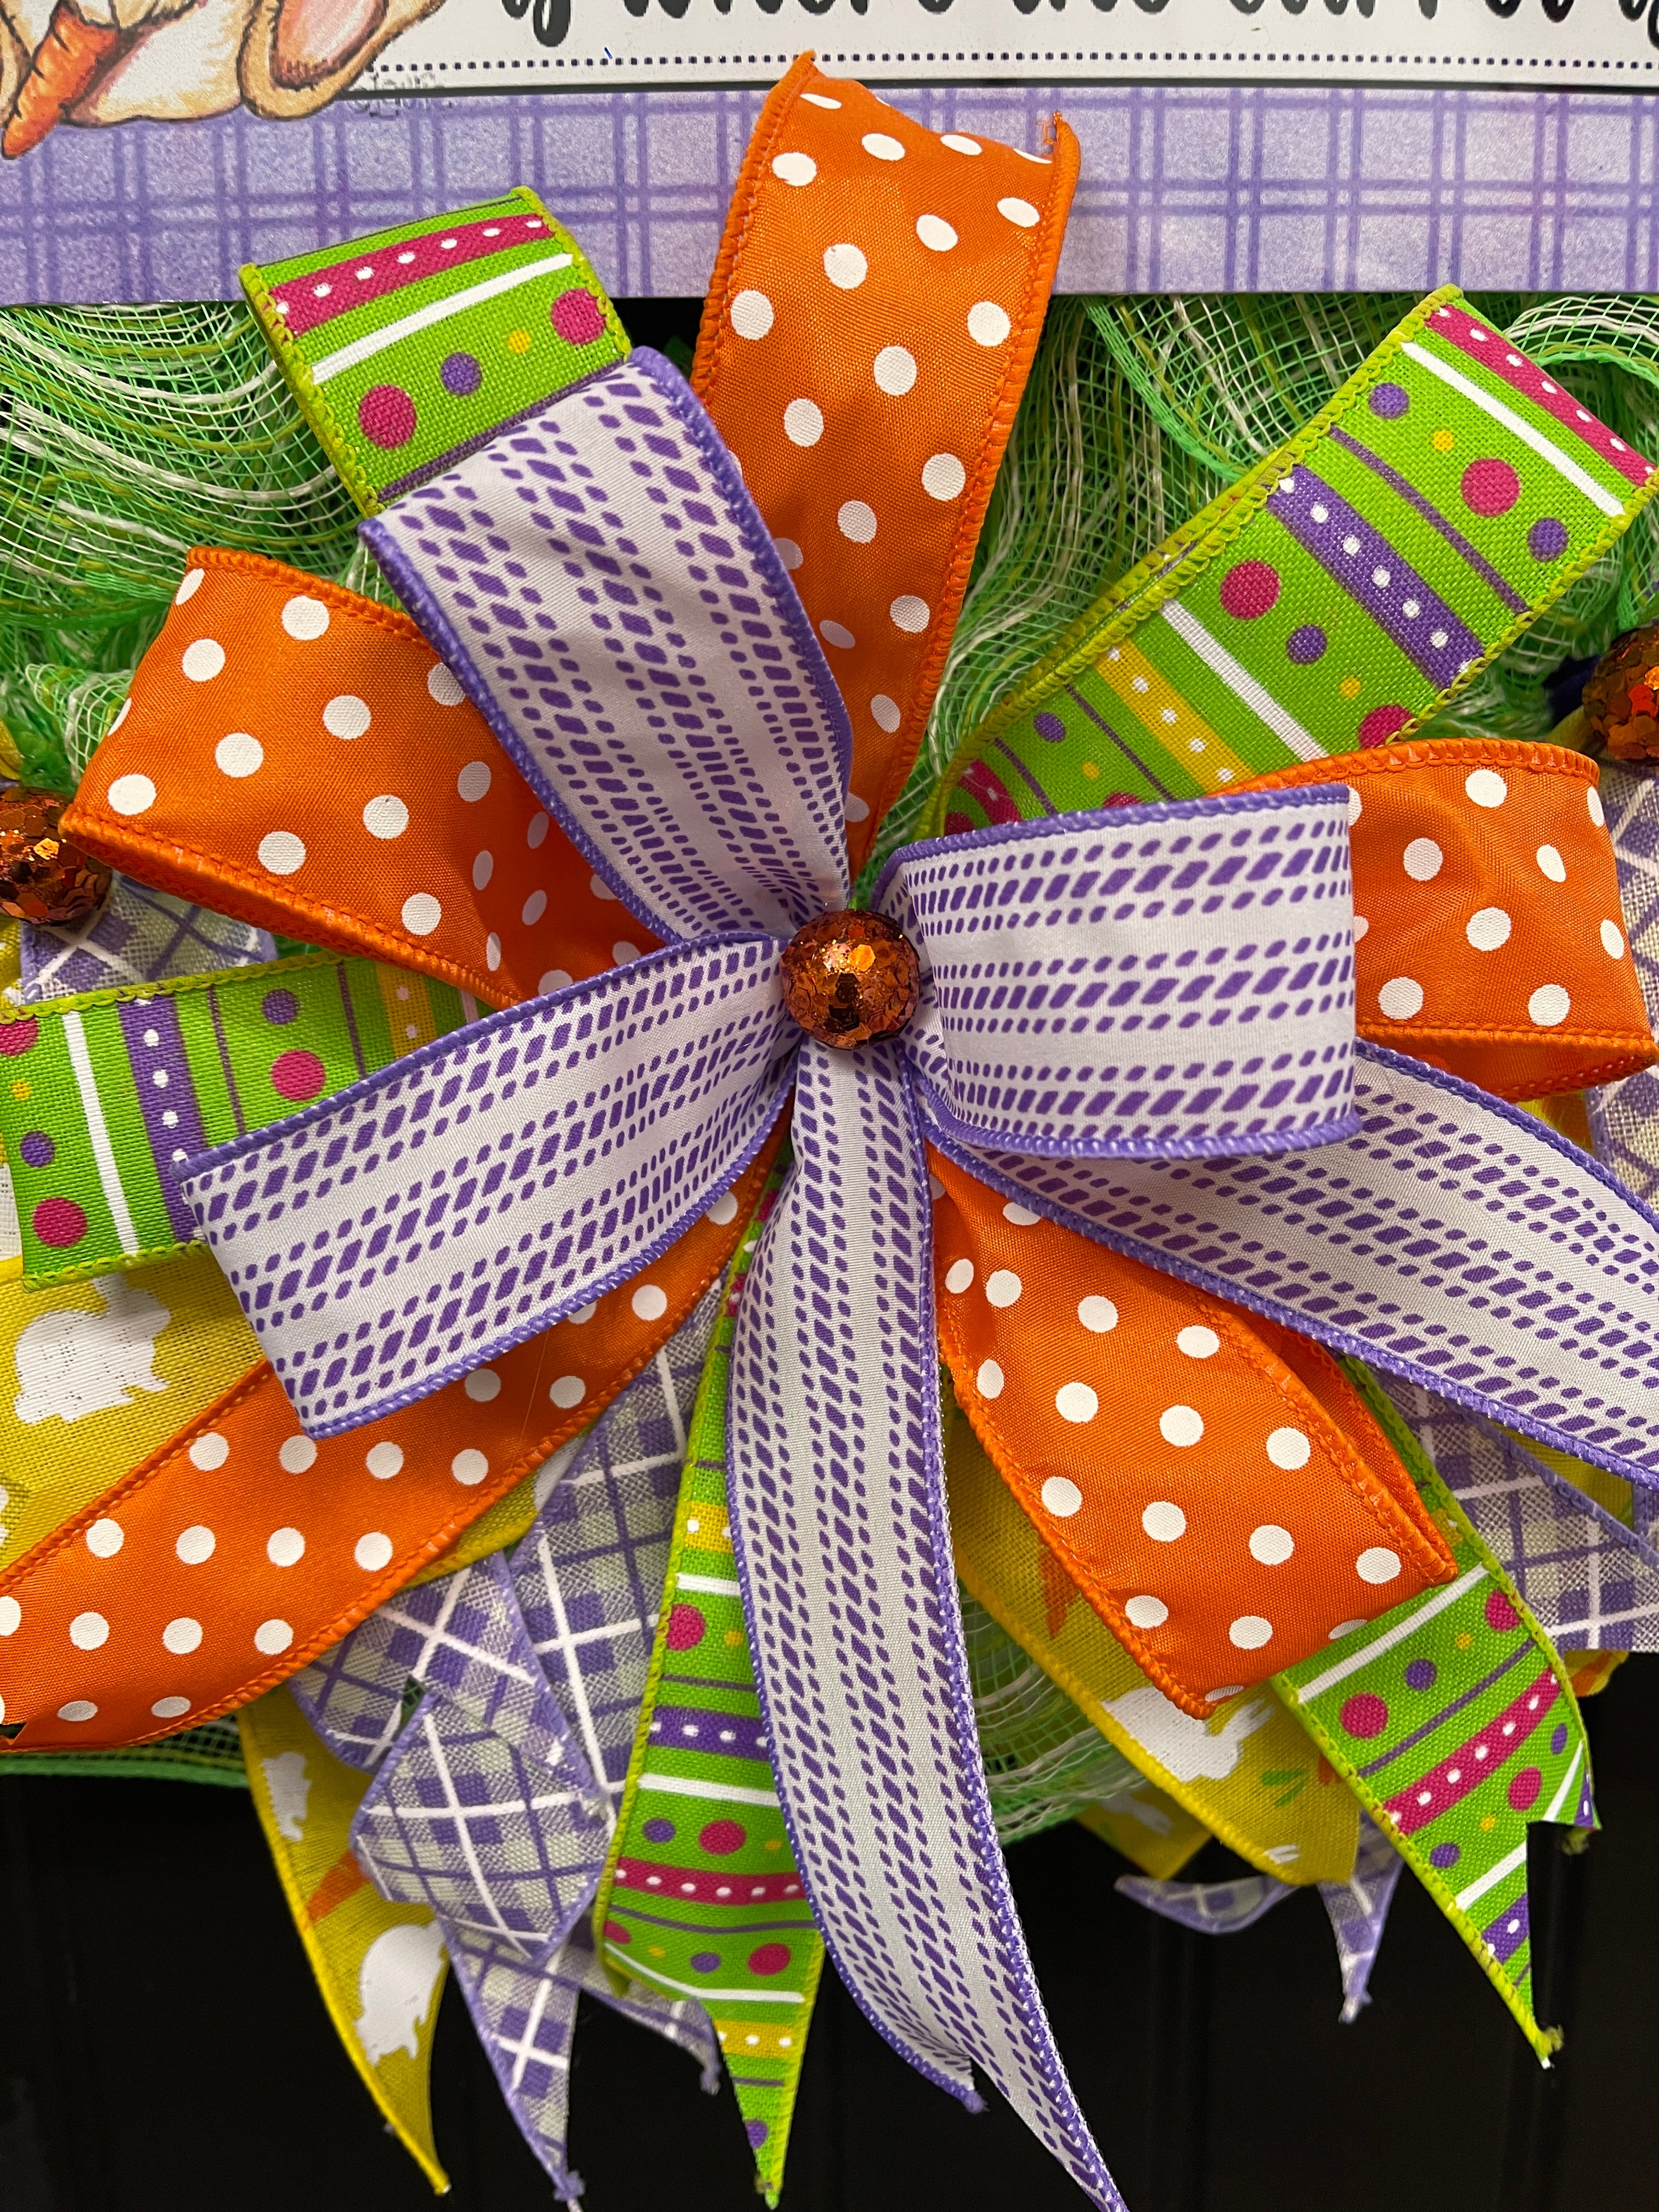 Close Up of Bow with Purple, White, Orange, Pink, and Green Ribbons with an Orange Ball in the Center